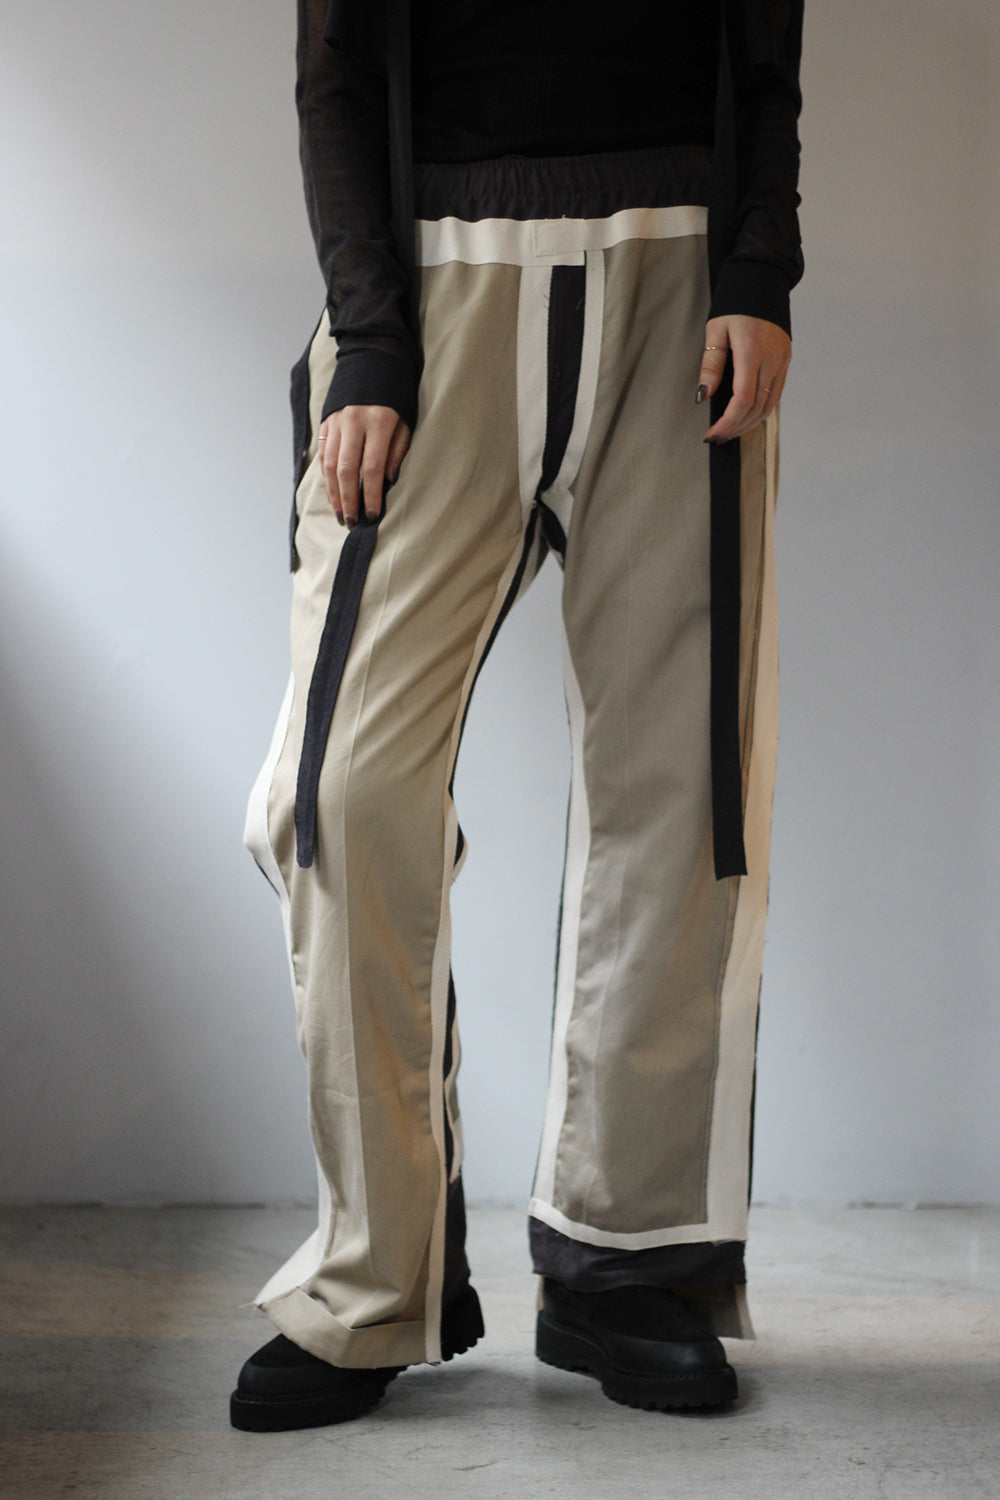 Rebuild by Needles "Chino Pant -> Covered Pant" (charcoal) 3